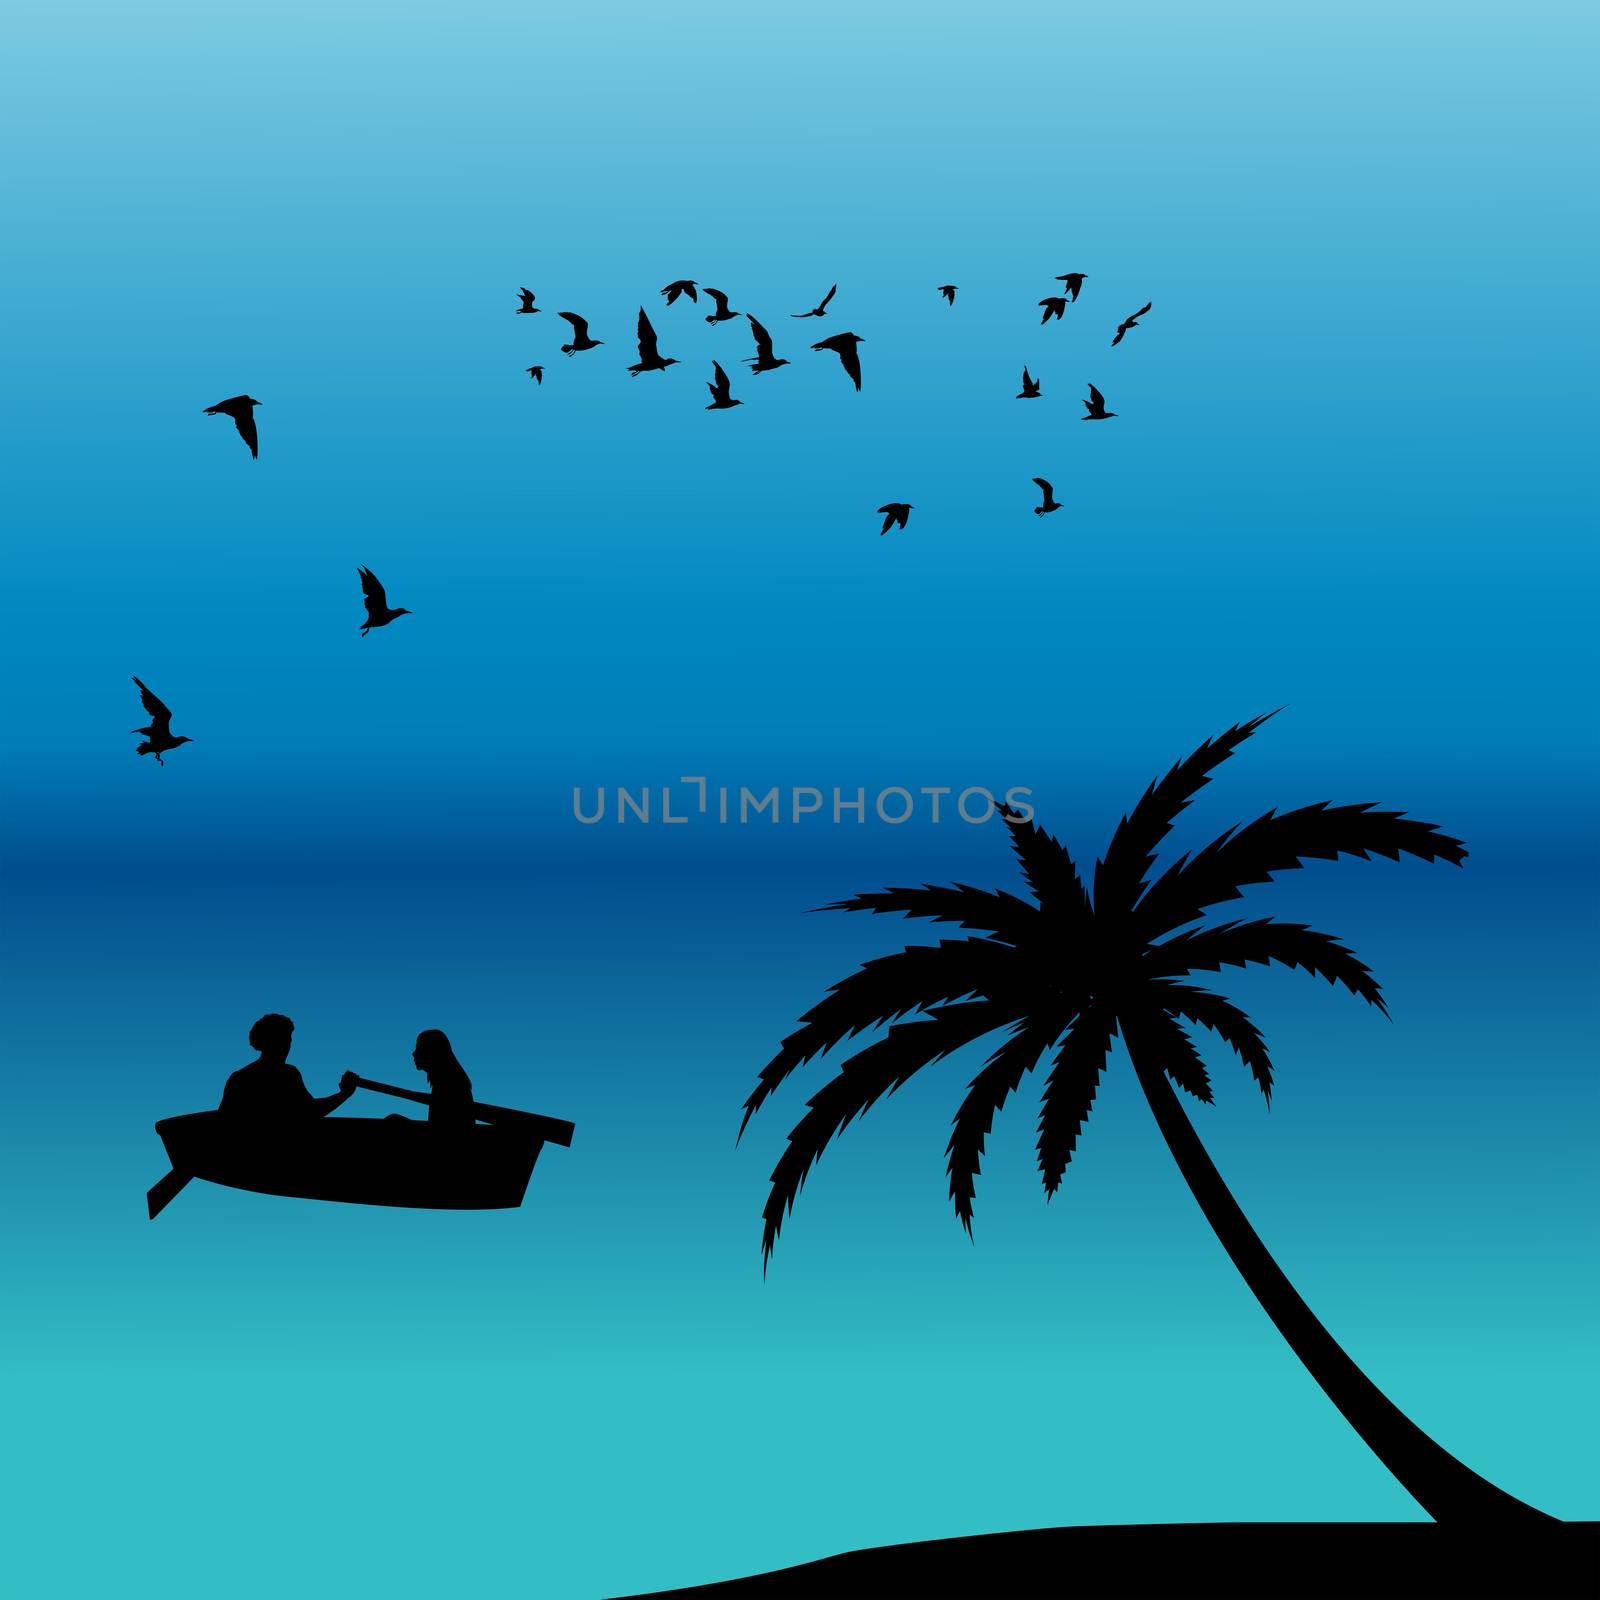 Romantic landscape with couple in a boat on ocean by hibrida13